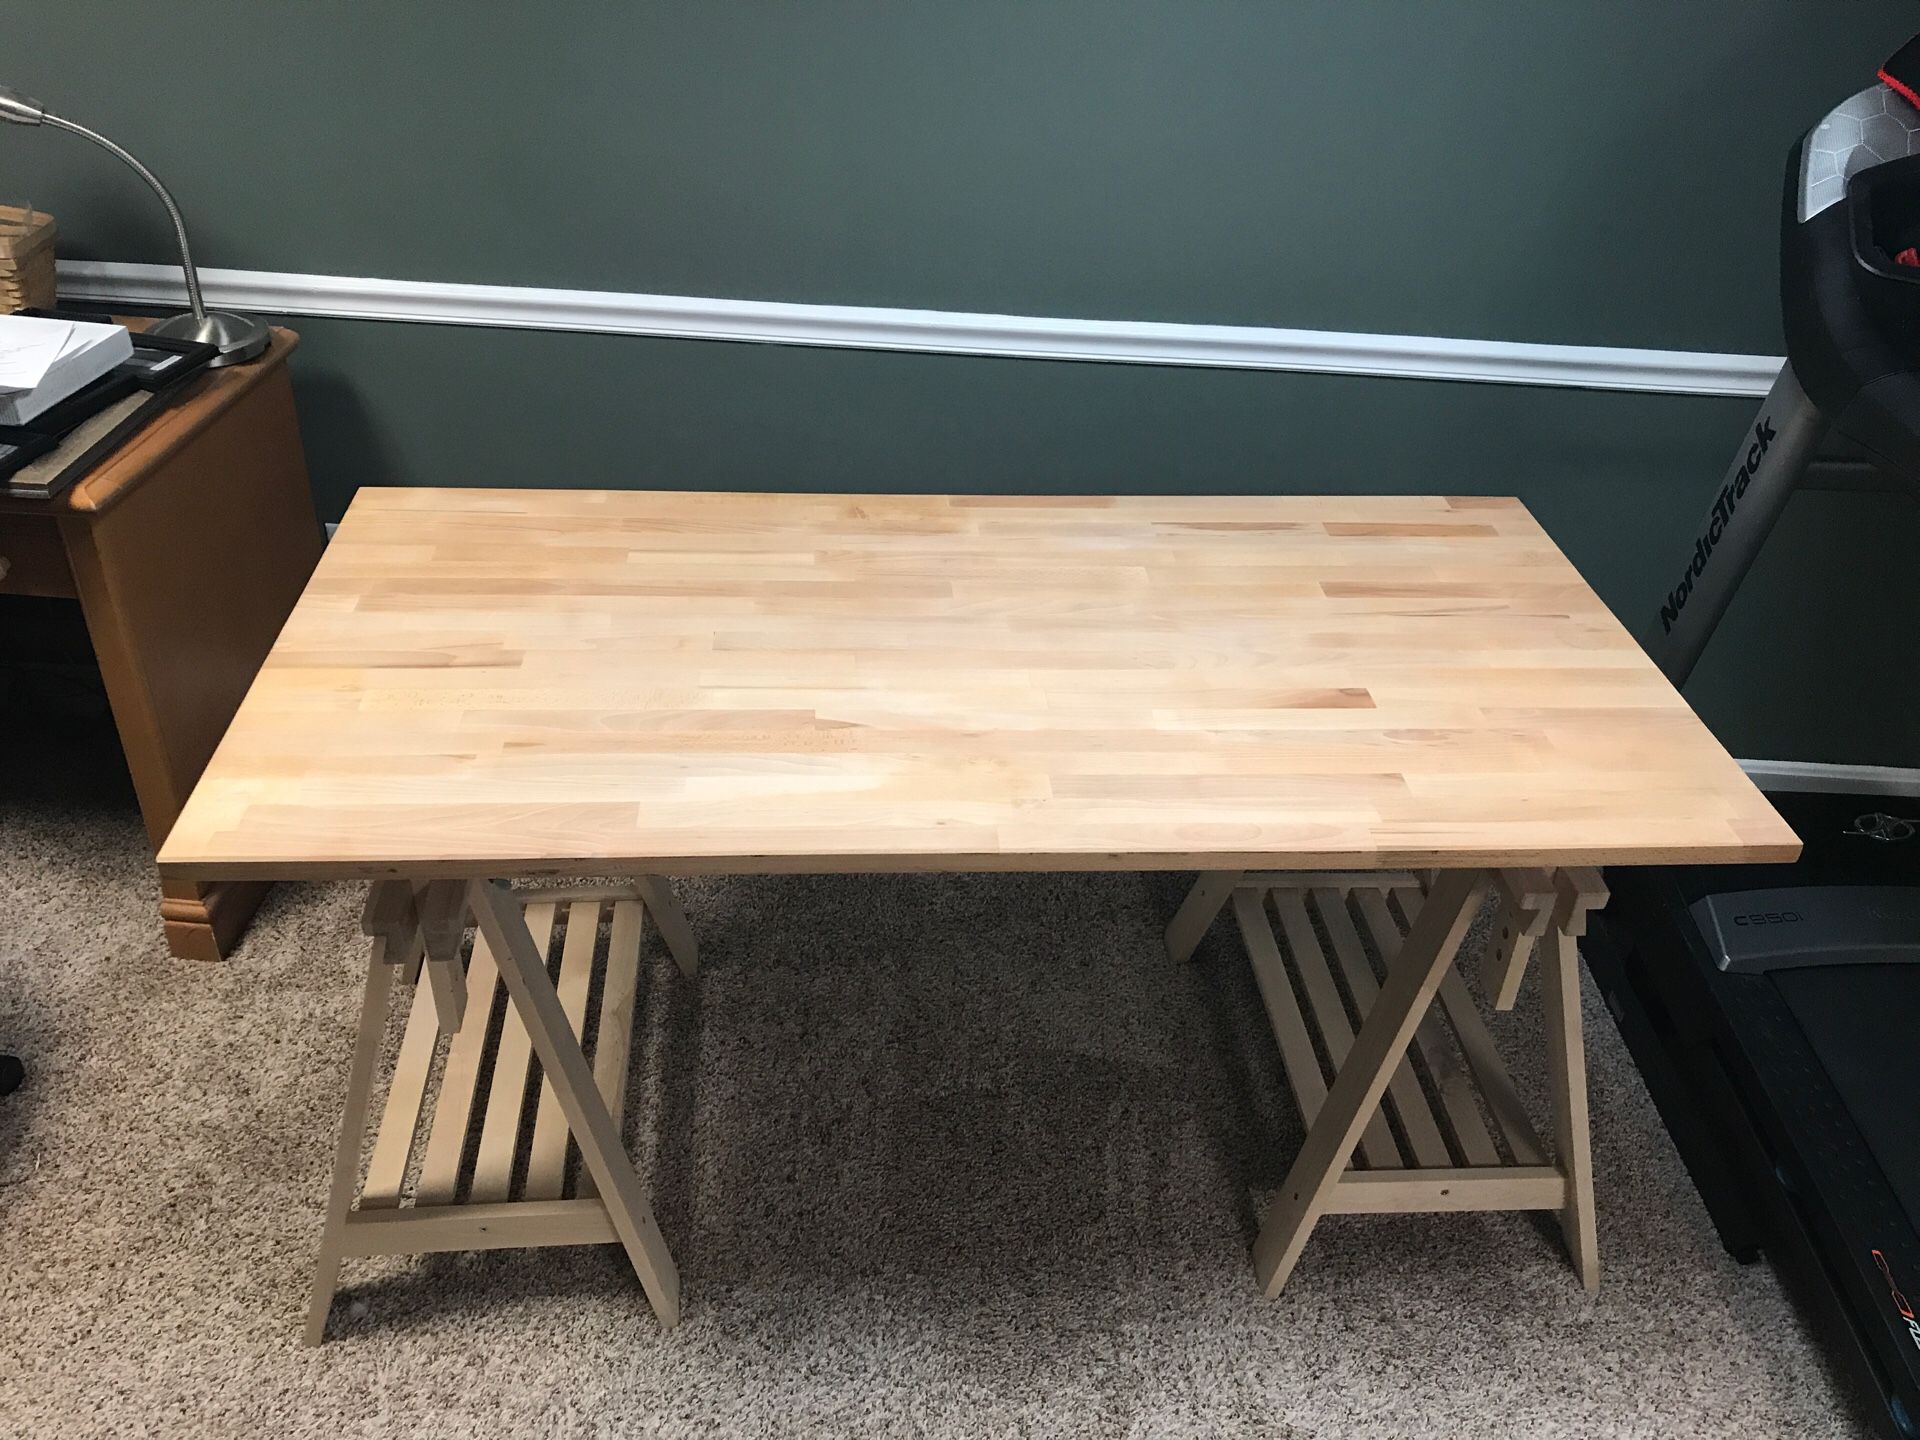 Beech and natural wood IKEA desk top with saw horse legs